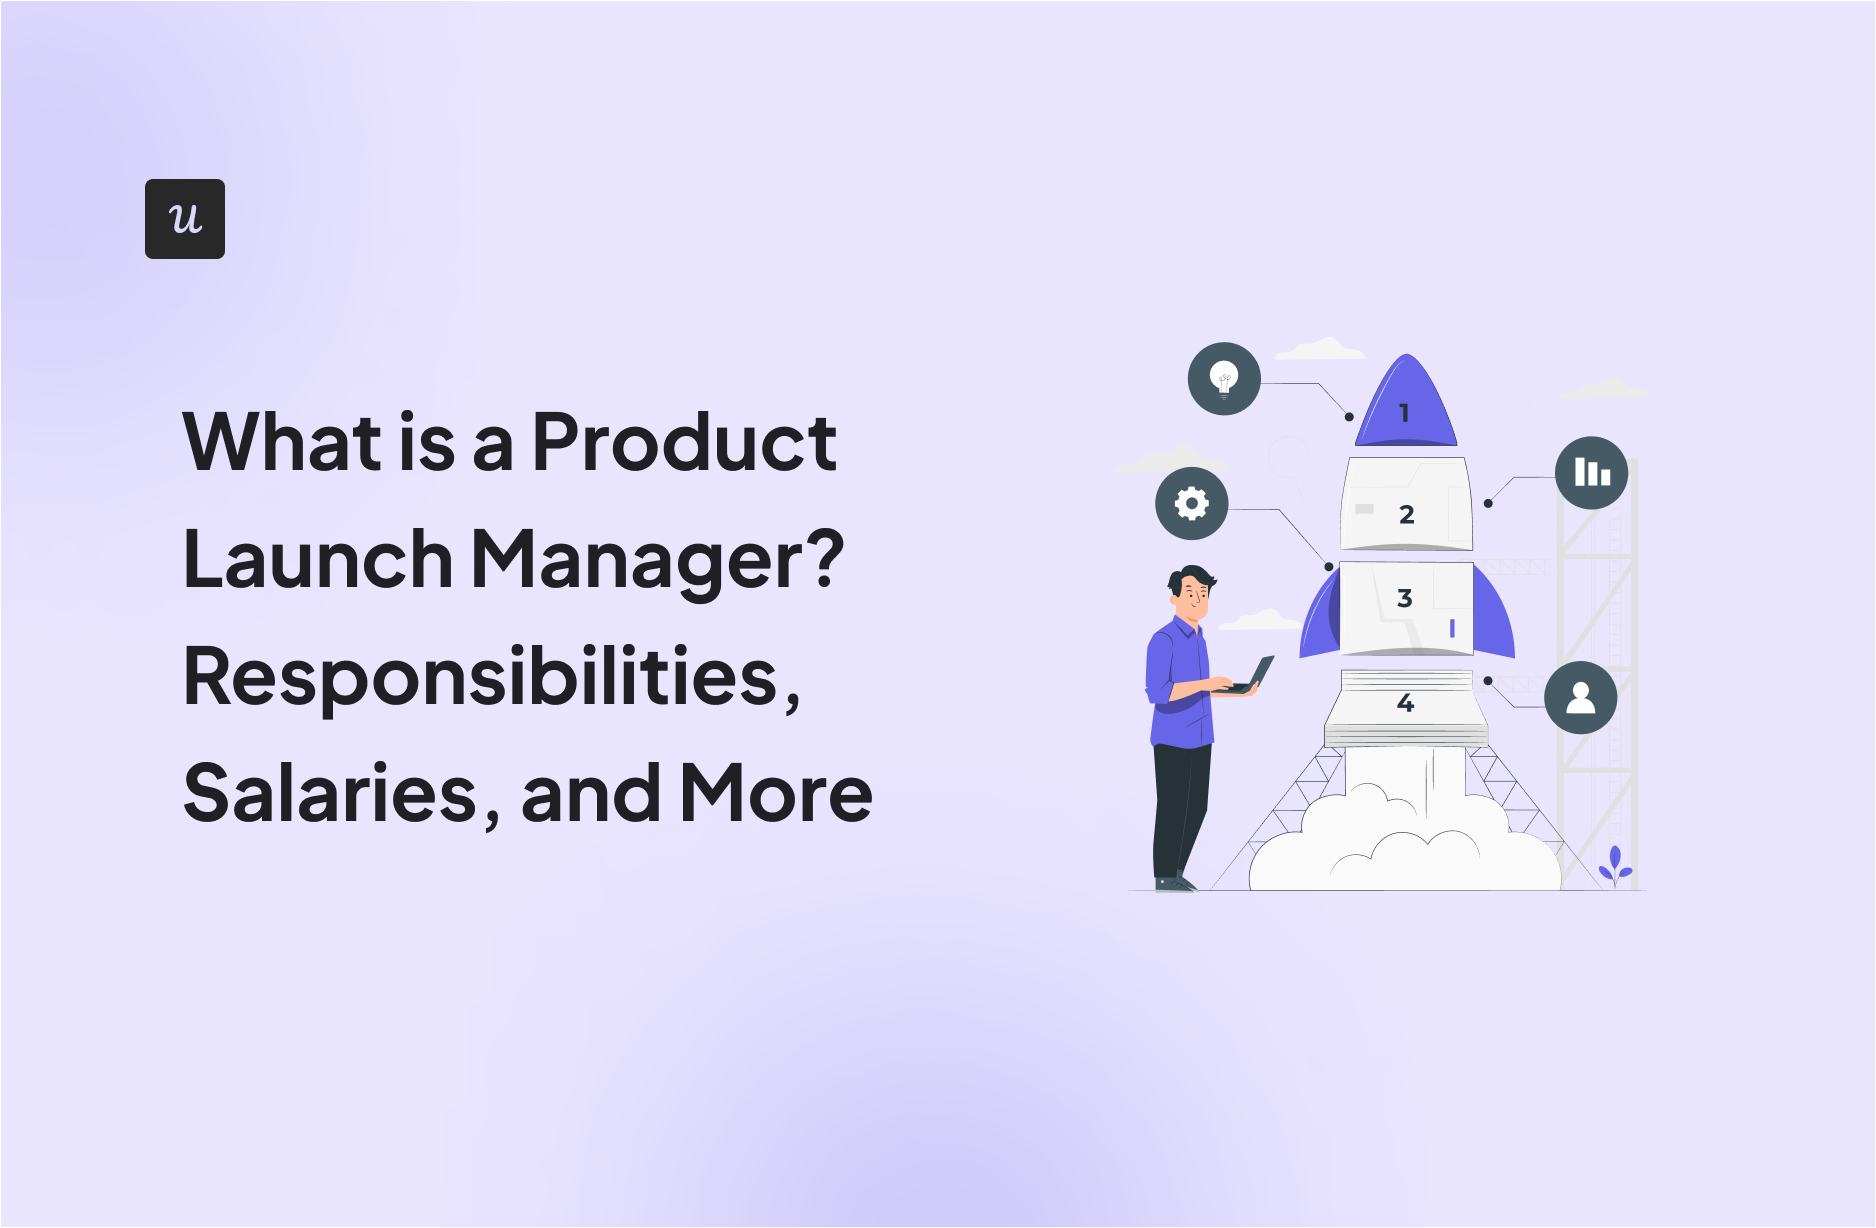 What is a Product Launch Manager? Responsibilities, Salaries, and More